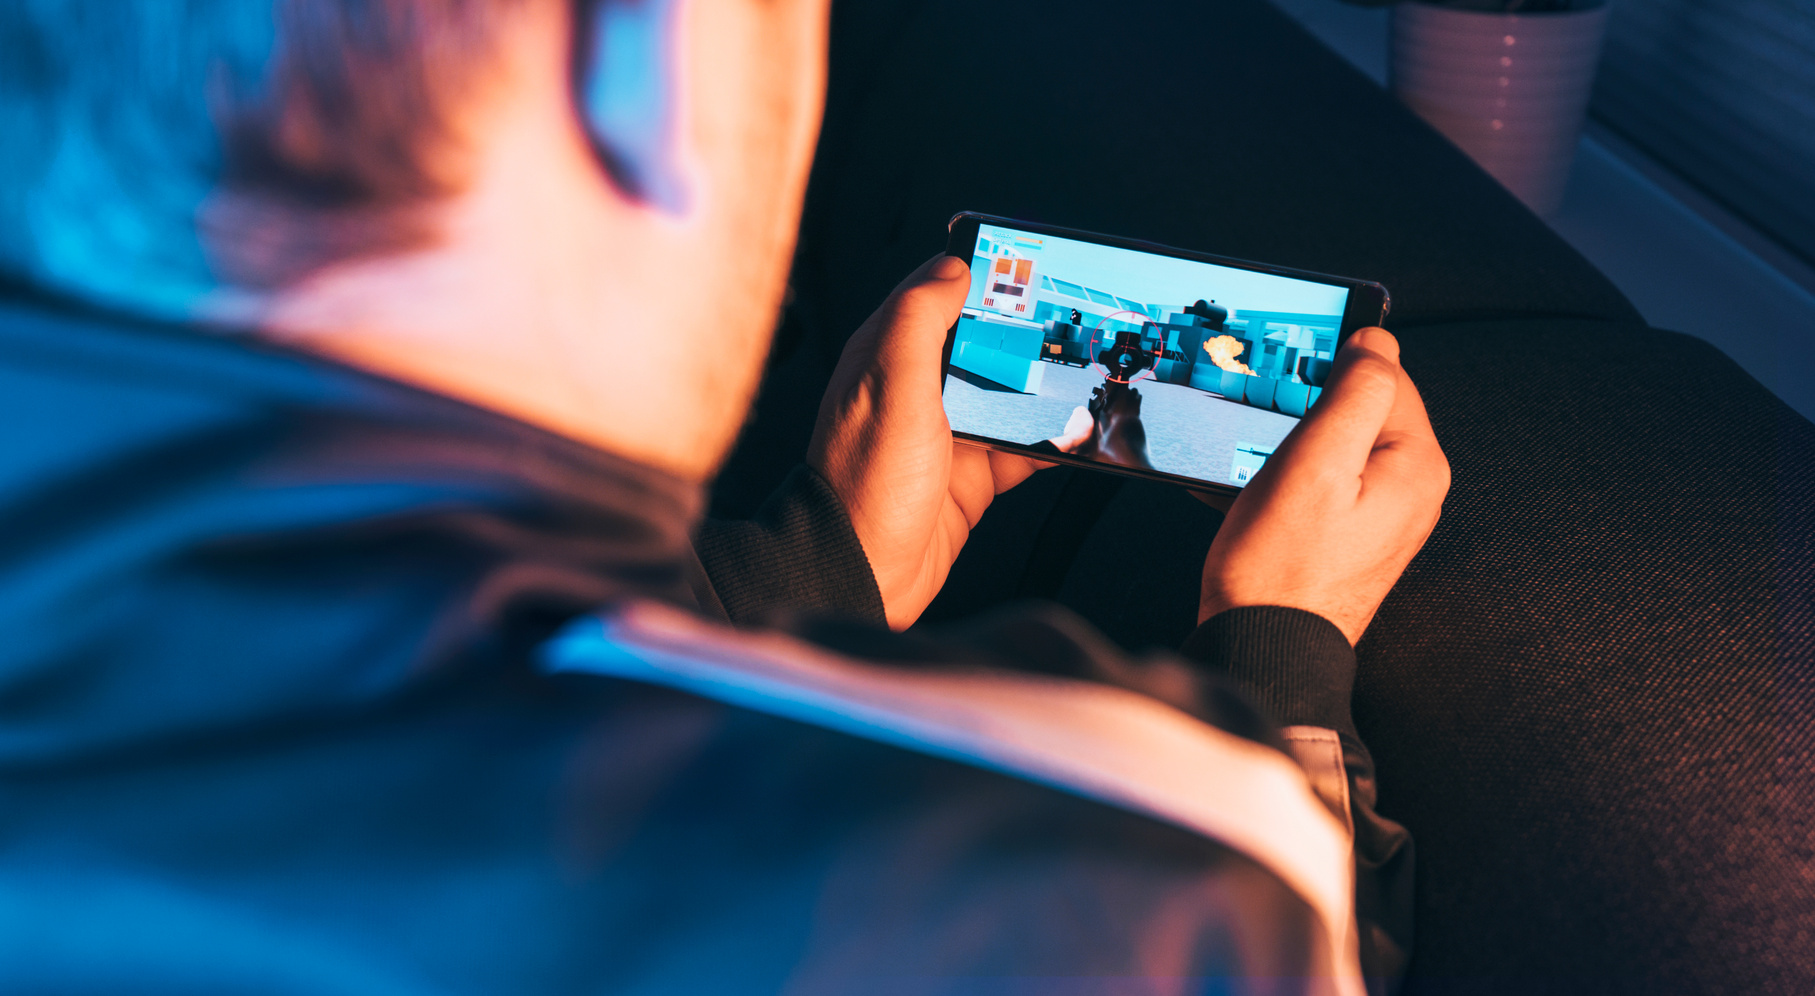 Action video game played by man holding mobile phone